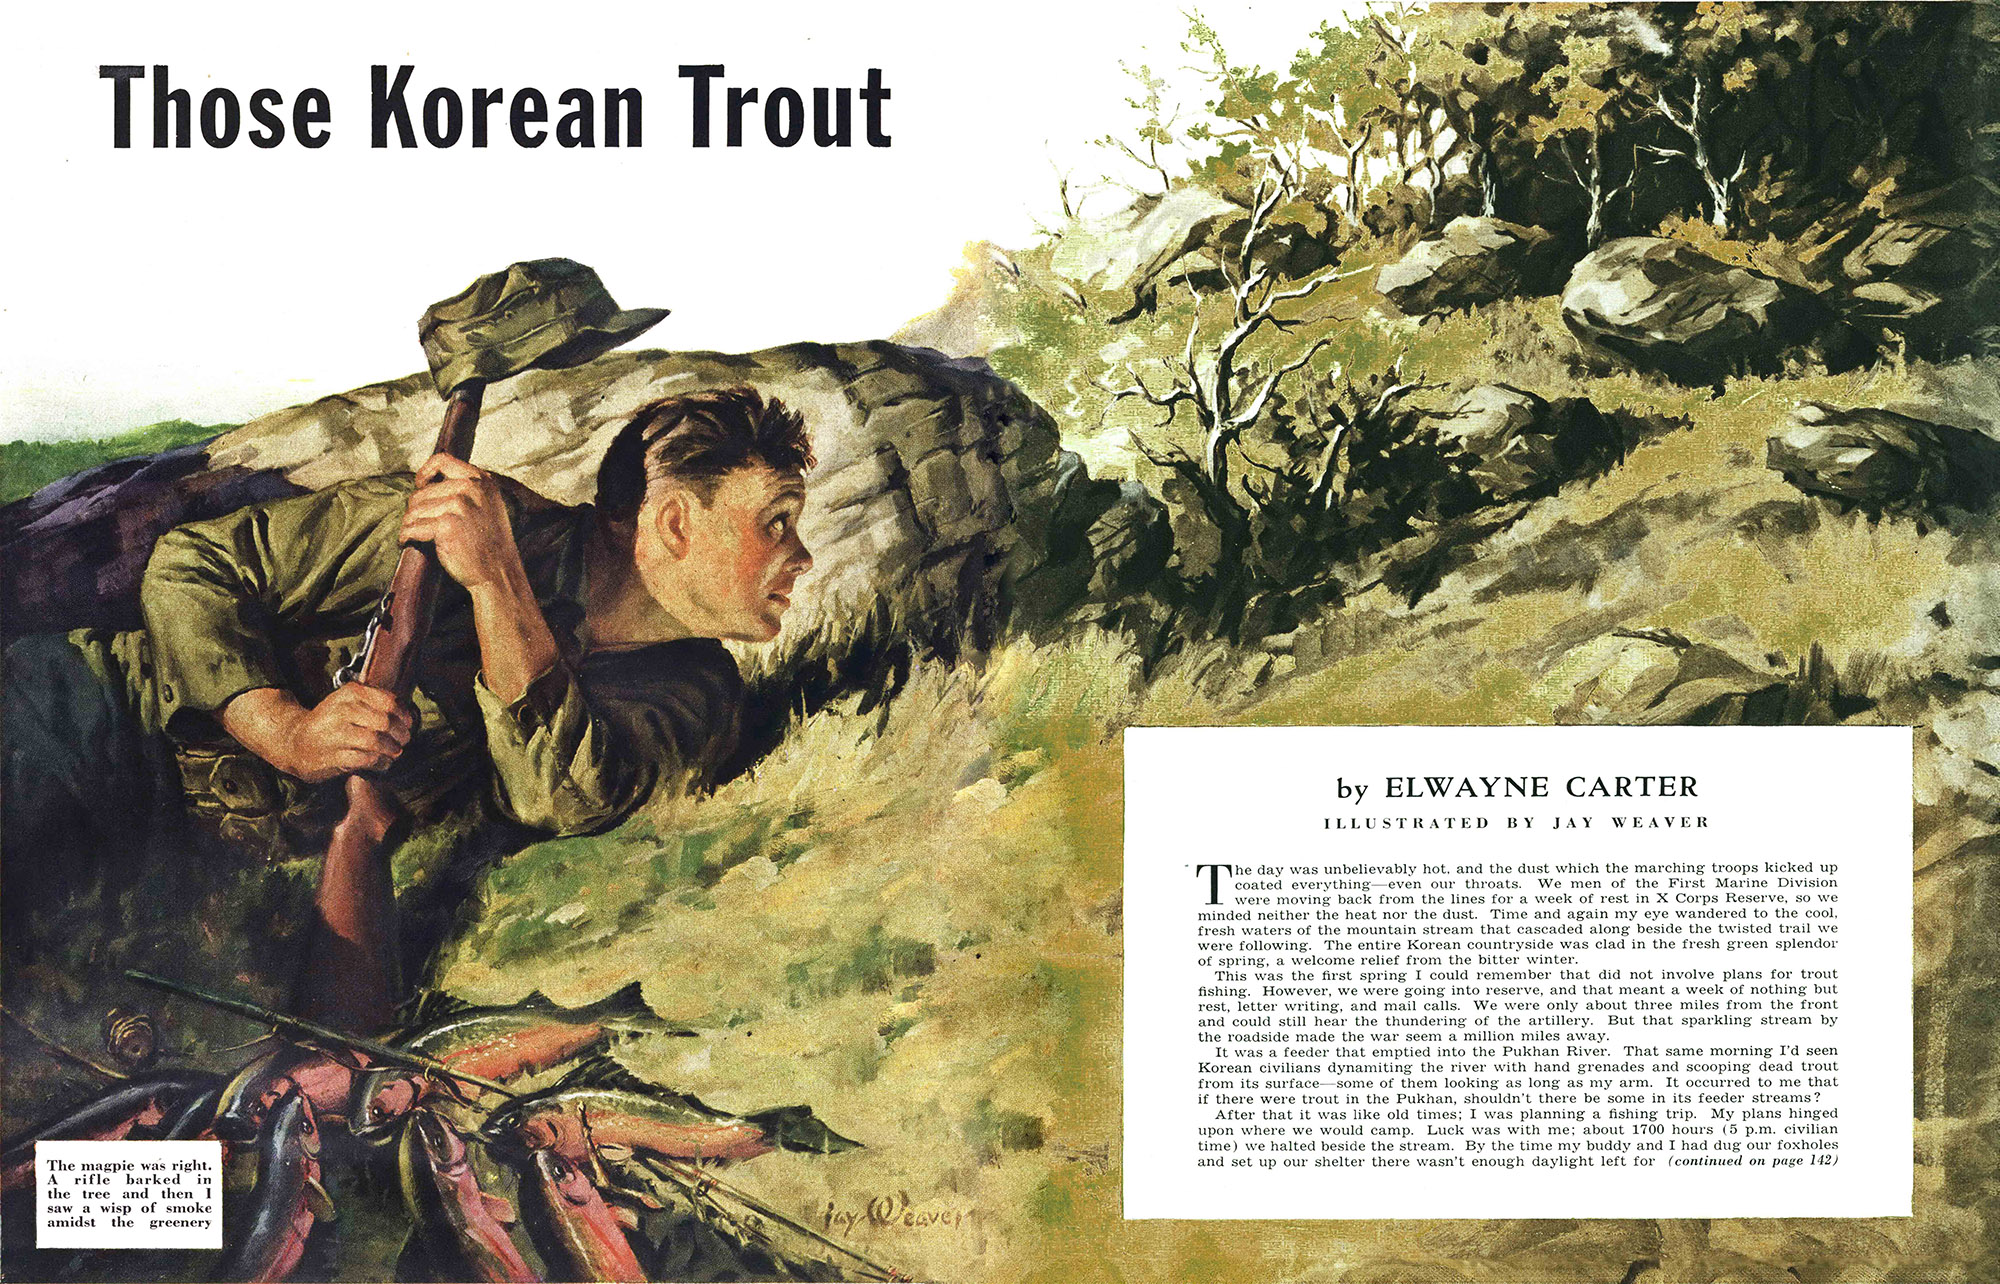 A USMC soldier trout fishing in Korea.